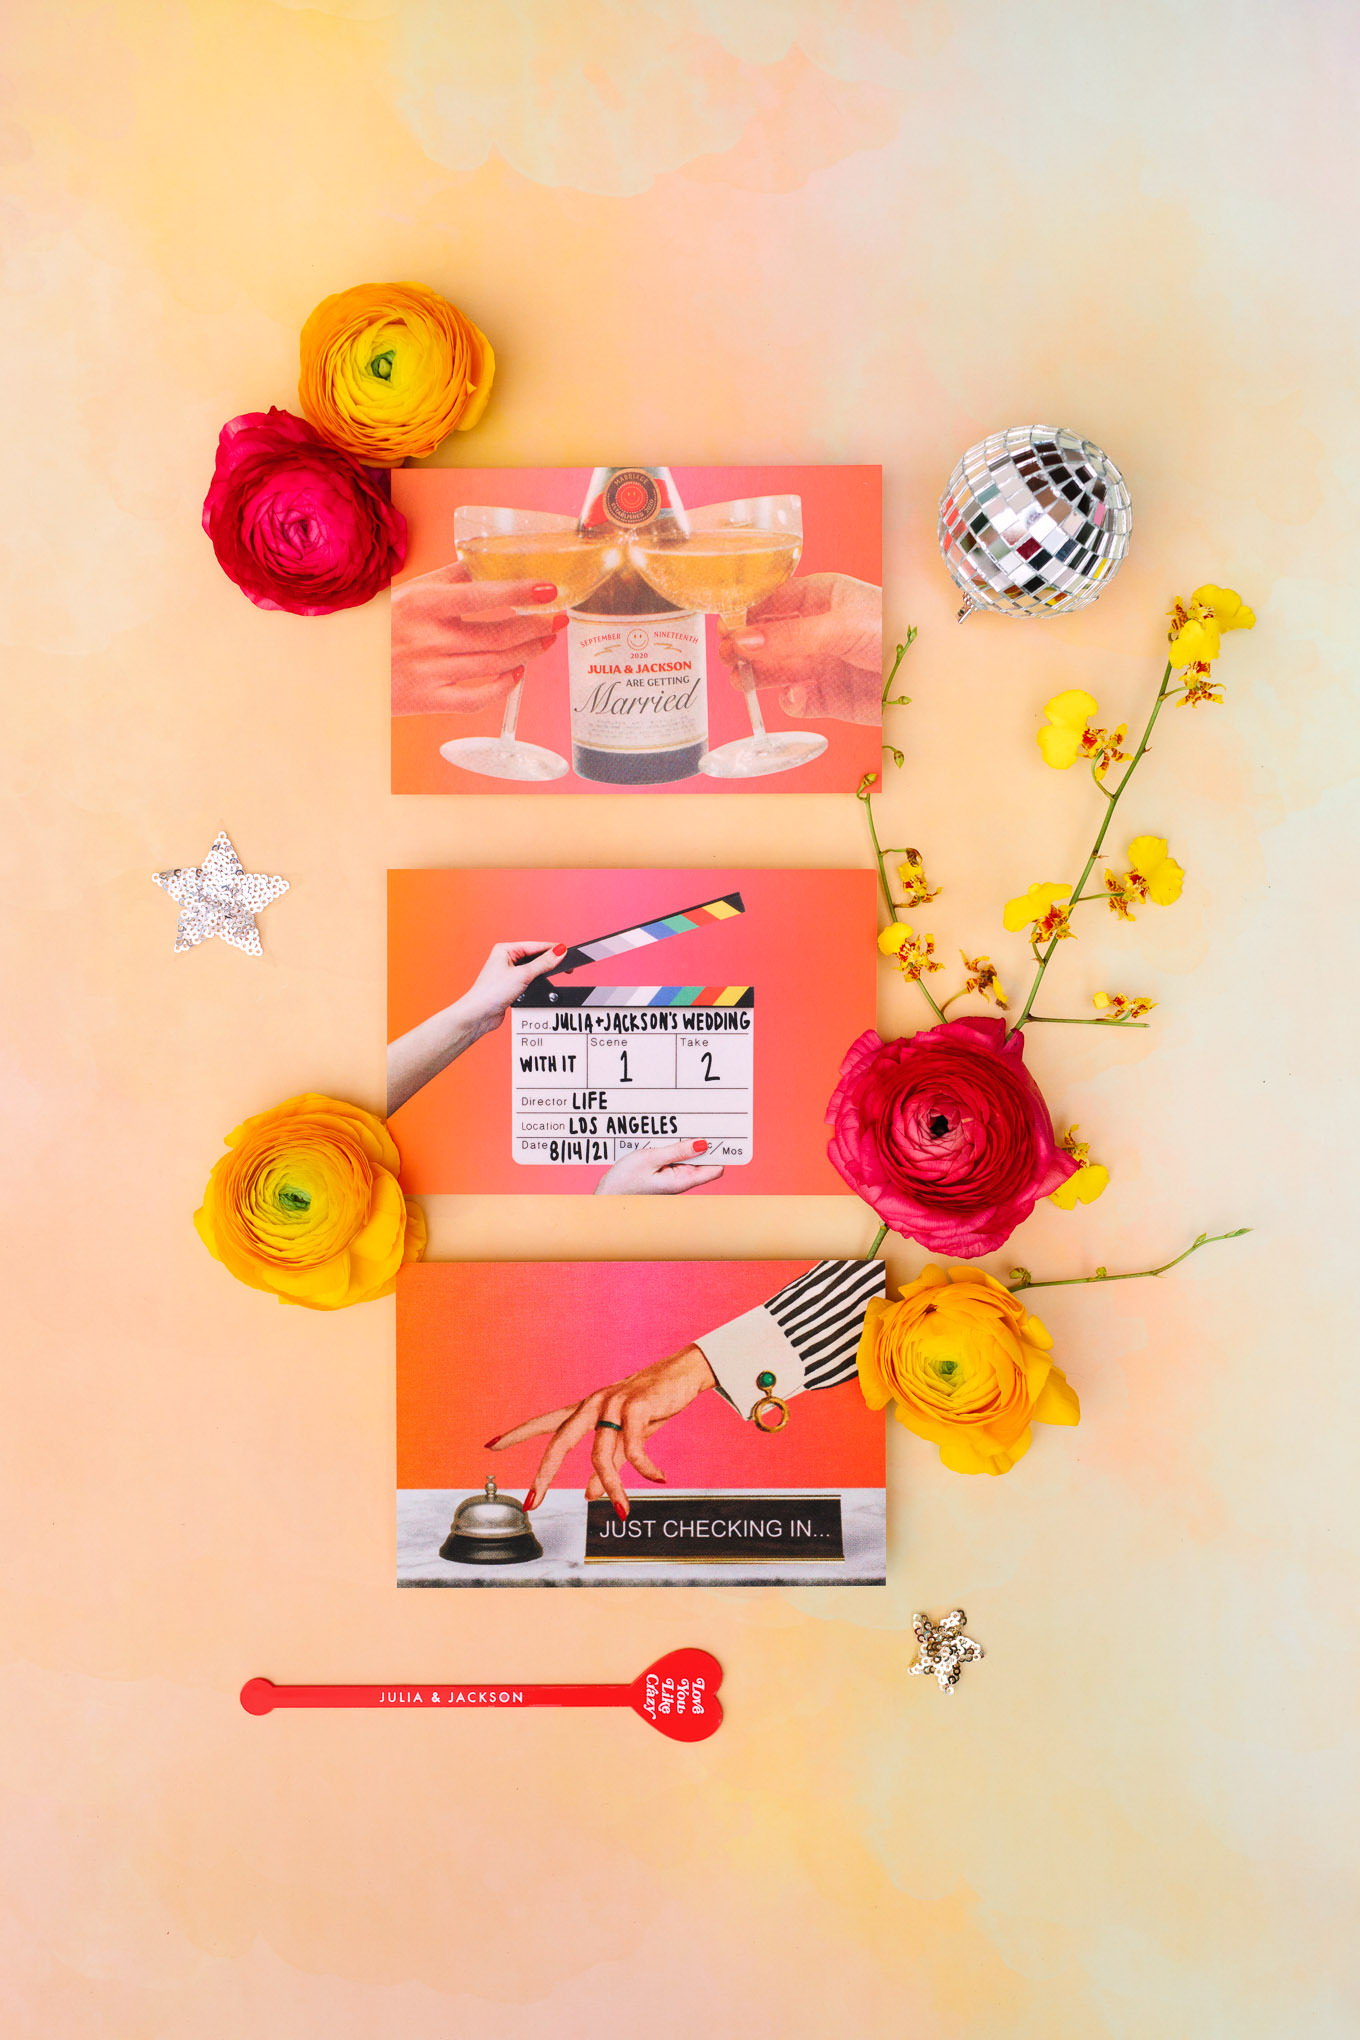 Guest postcards for wedding designed by bride Julia Walck | Colorful Downtown Los Angeles Valentine Wedding | Los Angeles wedding photographer | #losangeleswedding #colorfulwedding #DTLA #valentinedtla   Source: Mary Costa Photography | Los Angeles